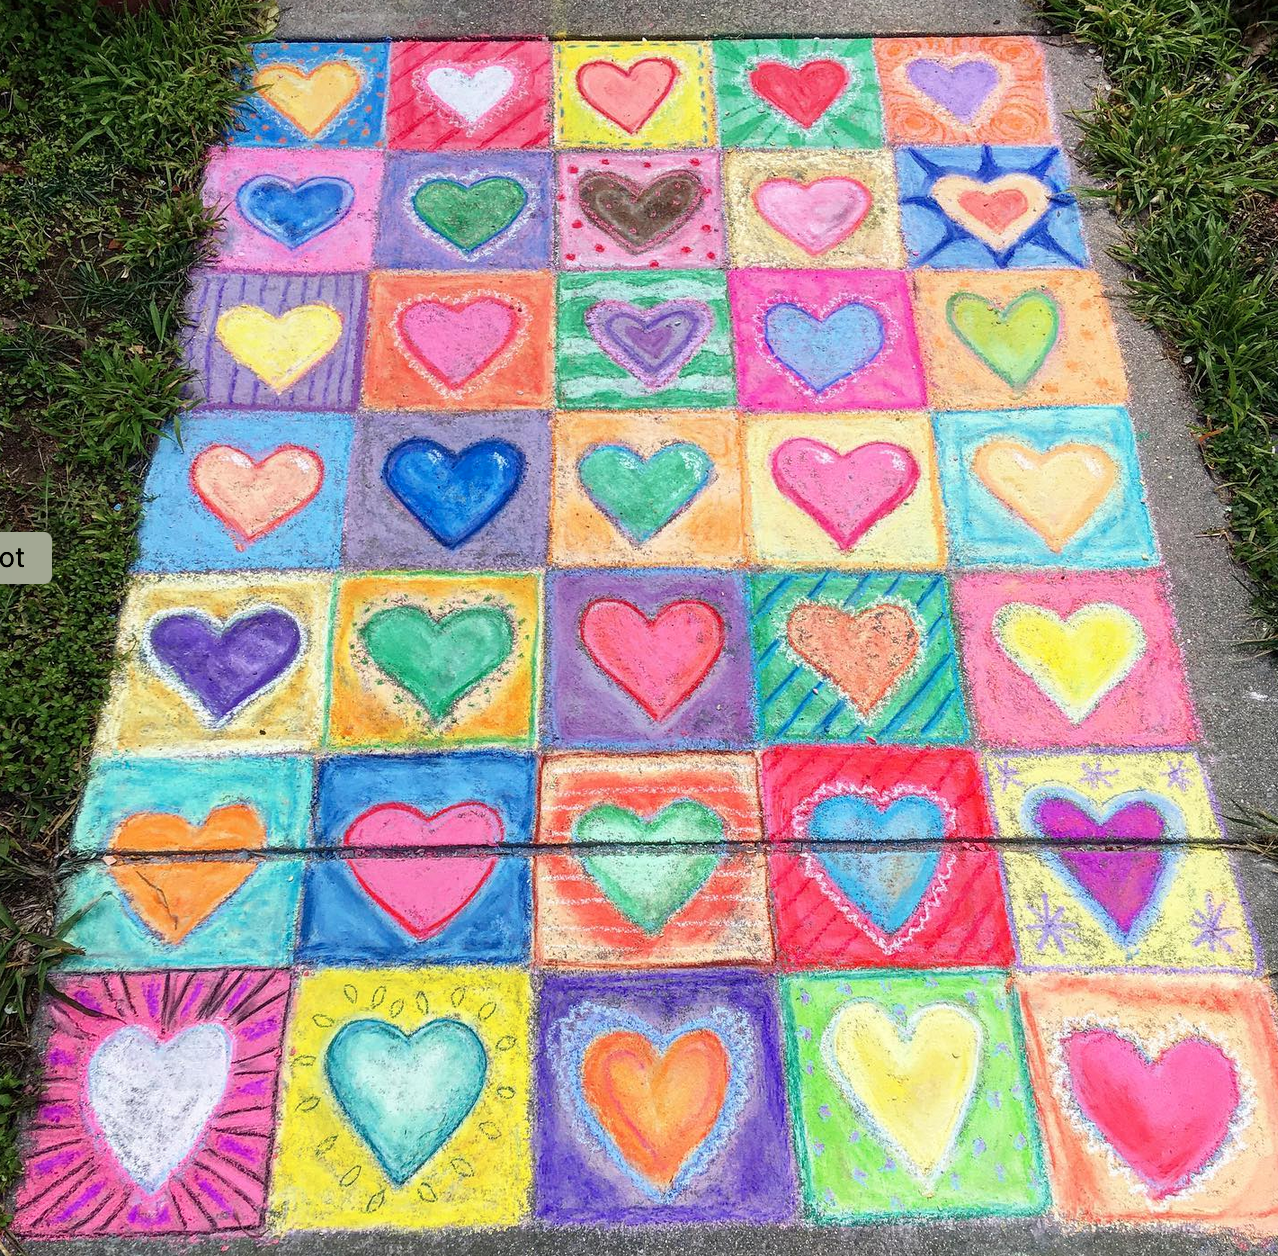 A colorful chalk mural on pavement, with 35 hearts in a 5x7 grid, like a quilt